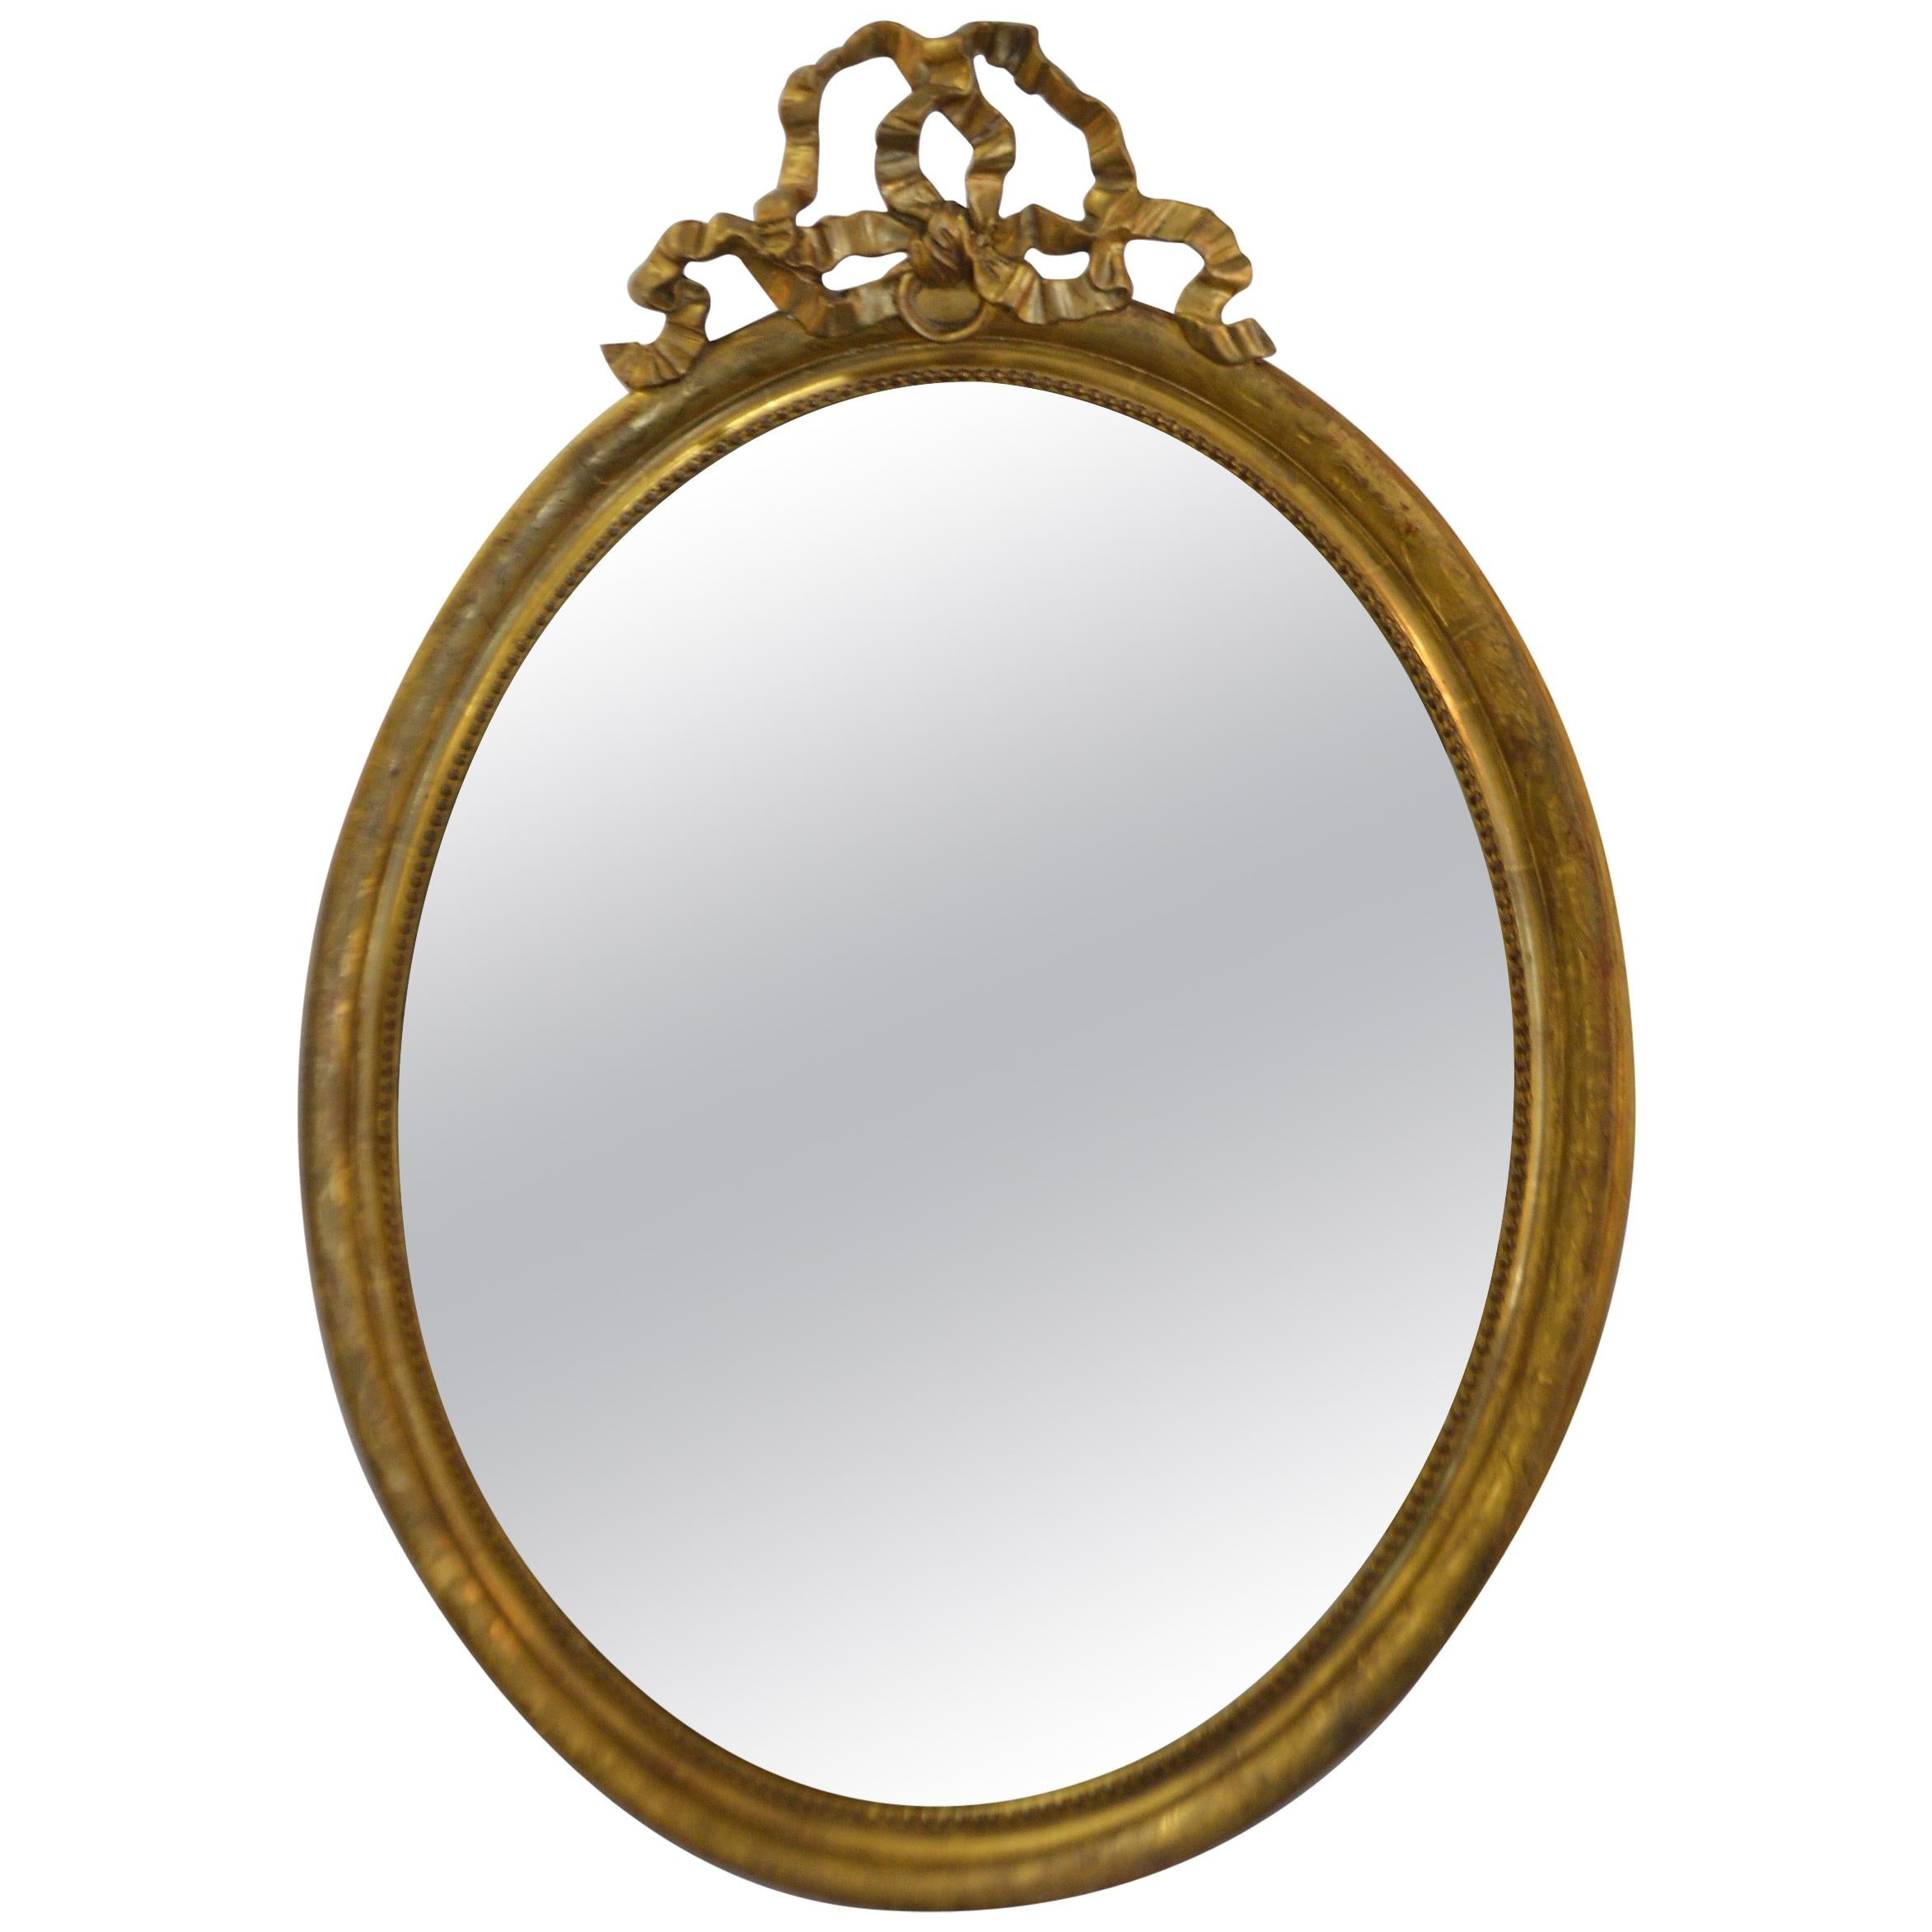 19th Century Louis XVI Style Gilded Oval Mirror, a Large Bow above the Frame